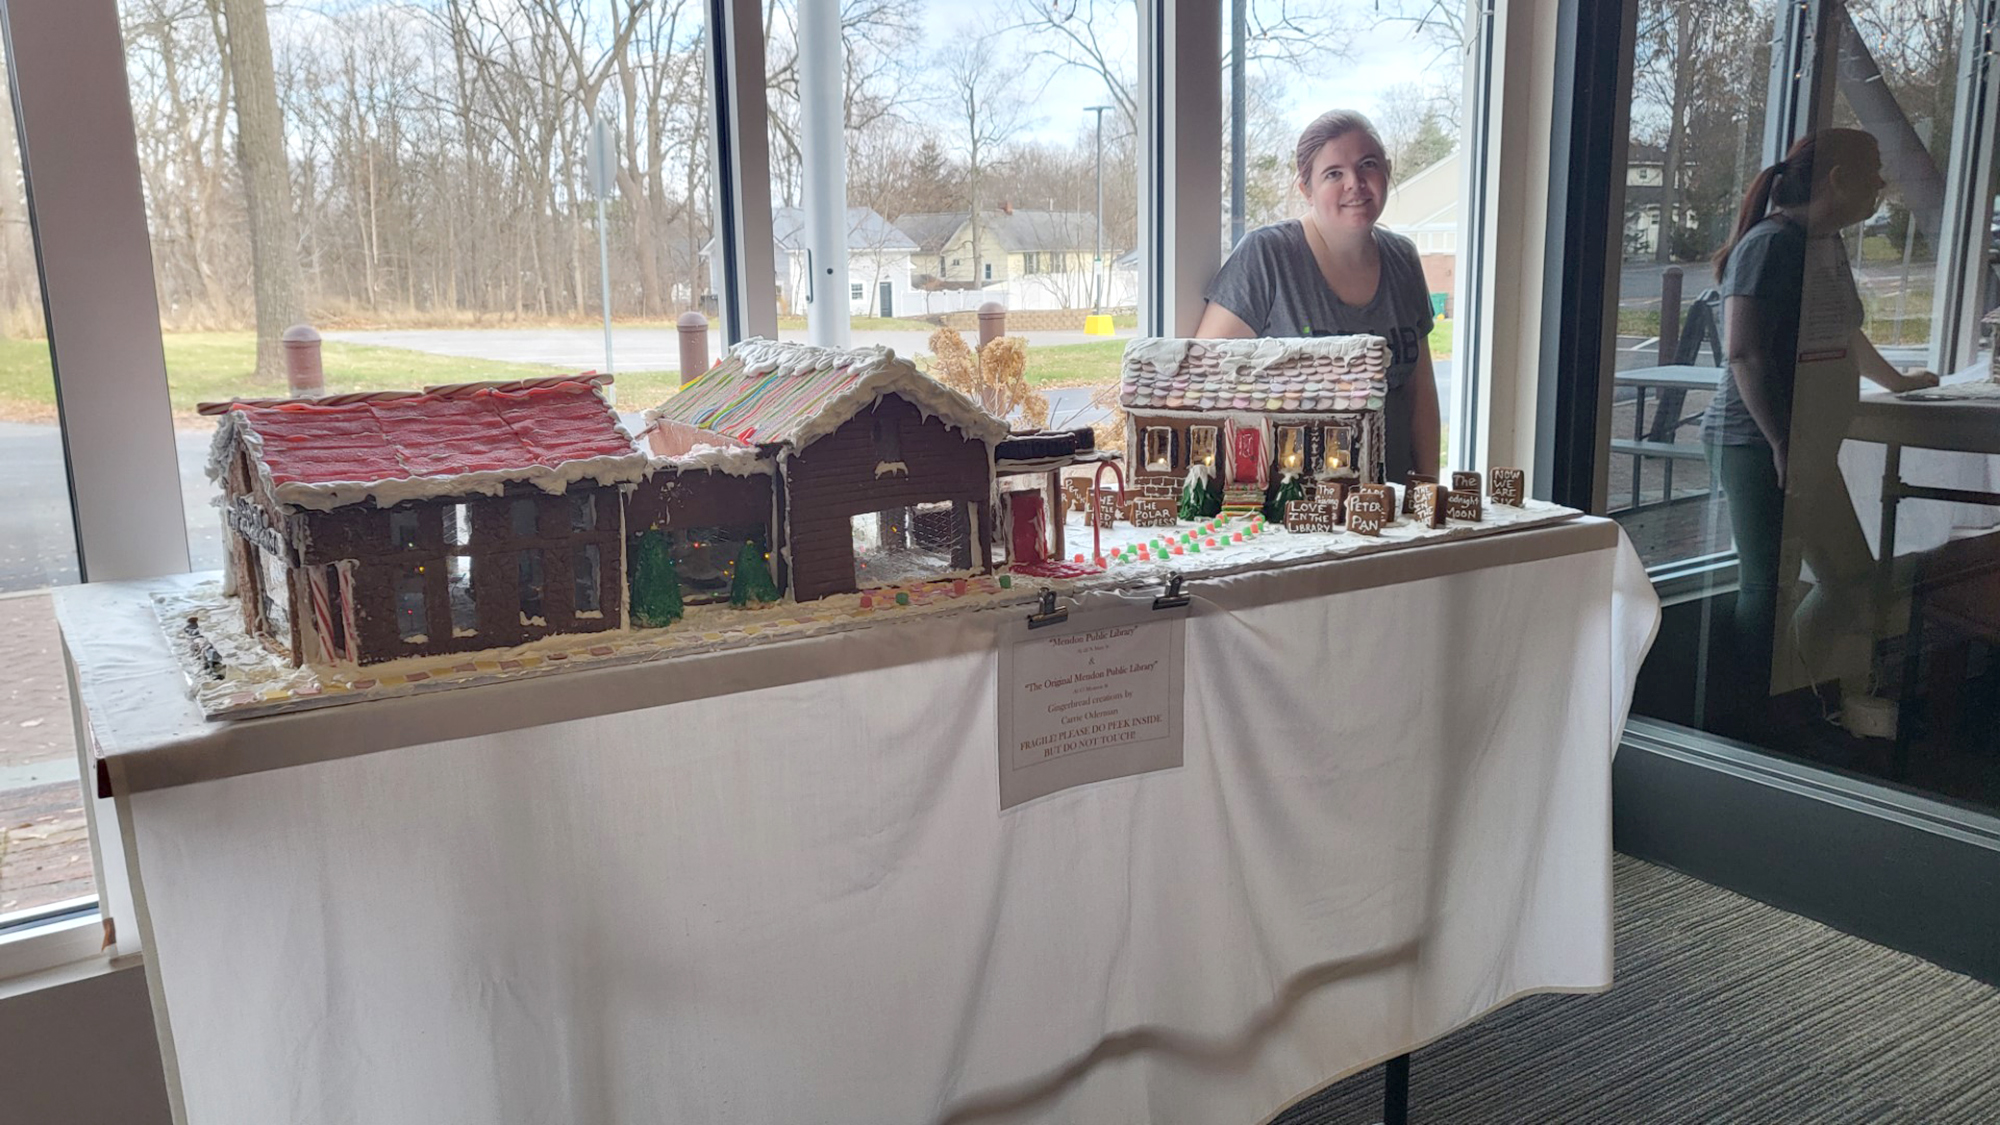 Gingerbread Creations By Local Patron Celebrates Mendon Public Library